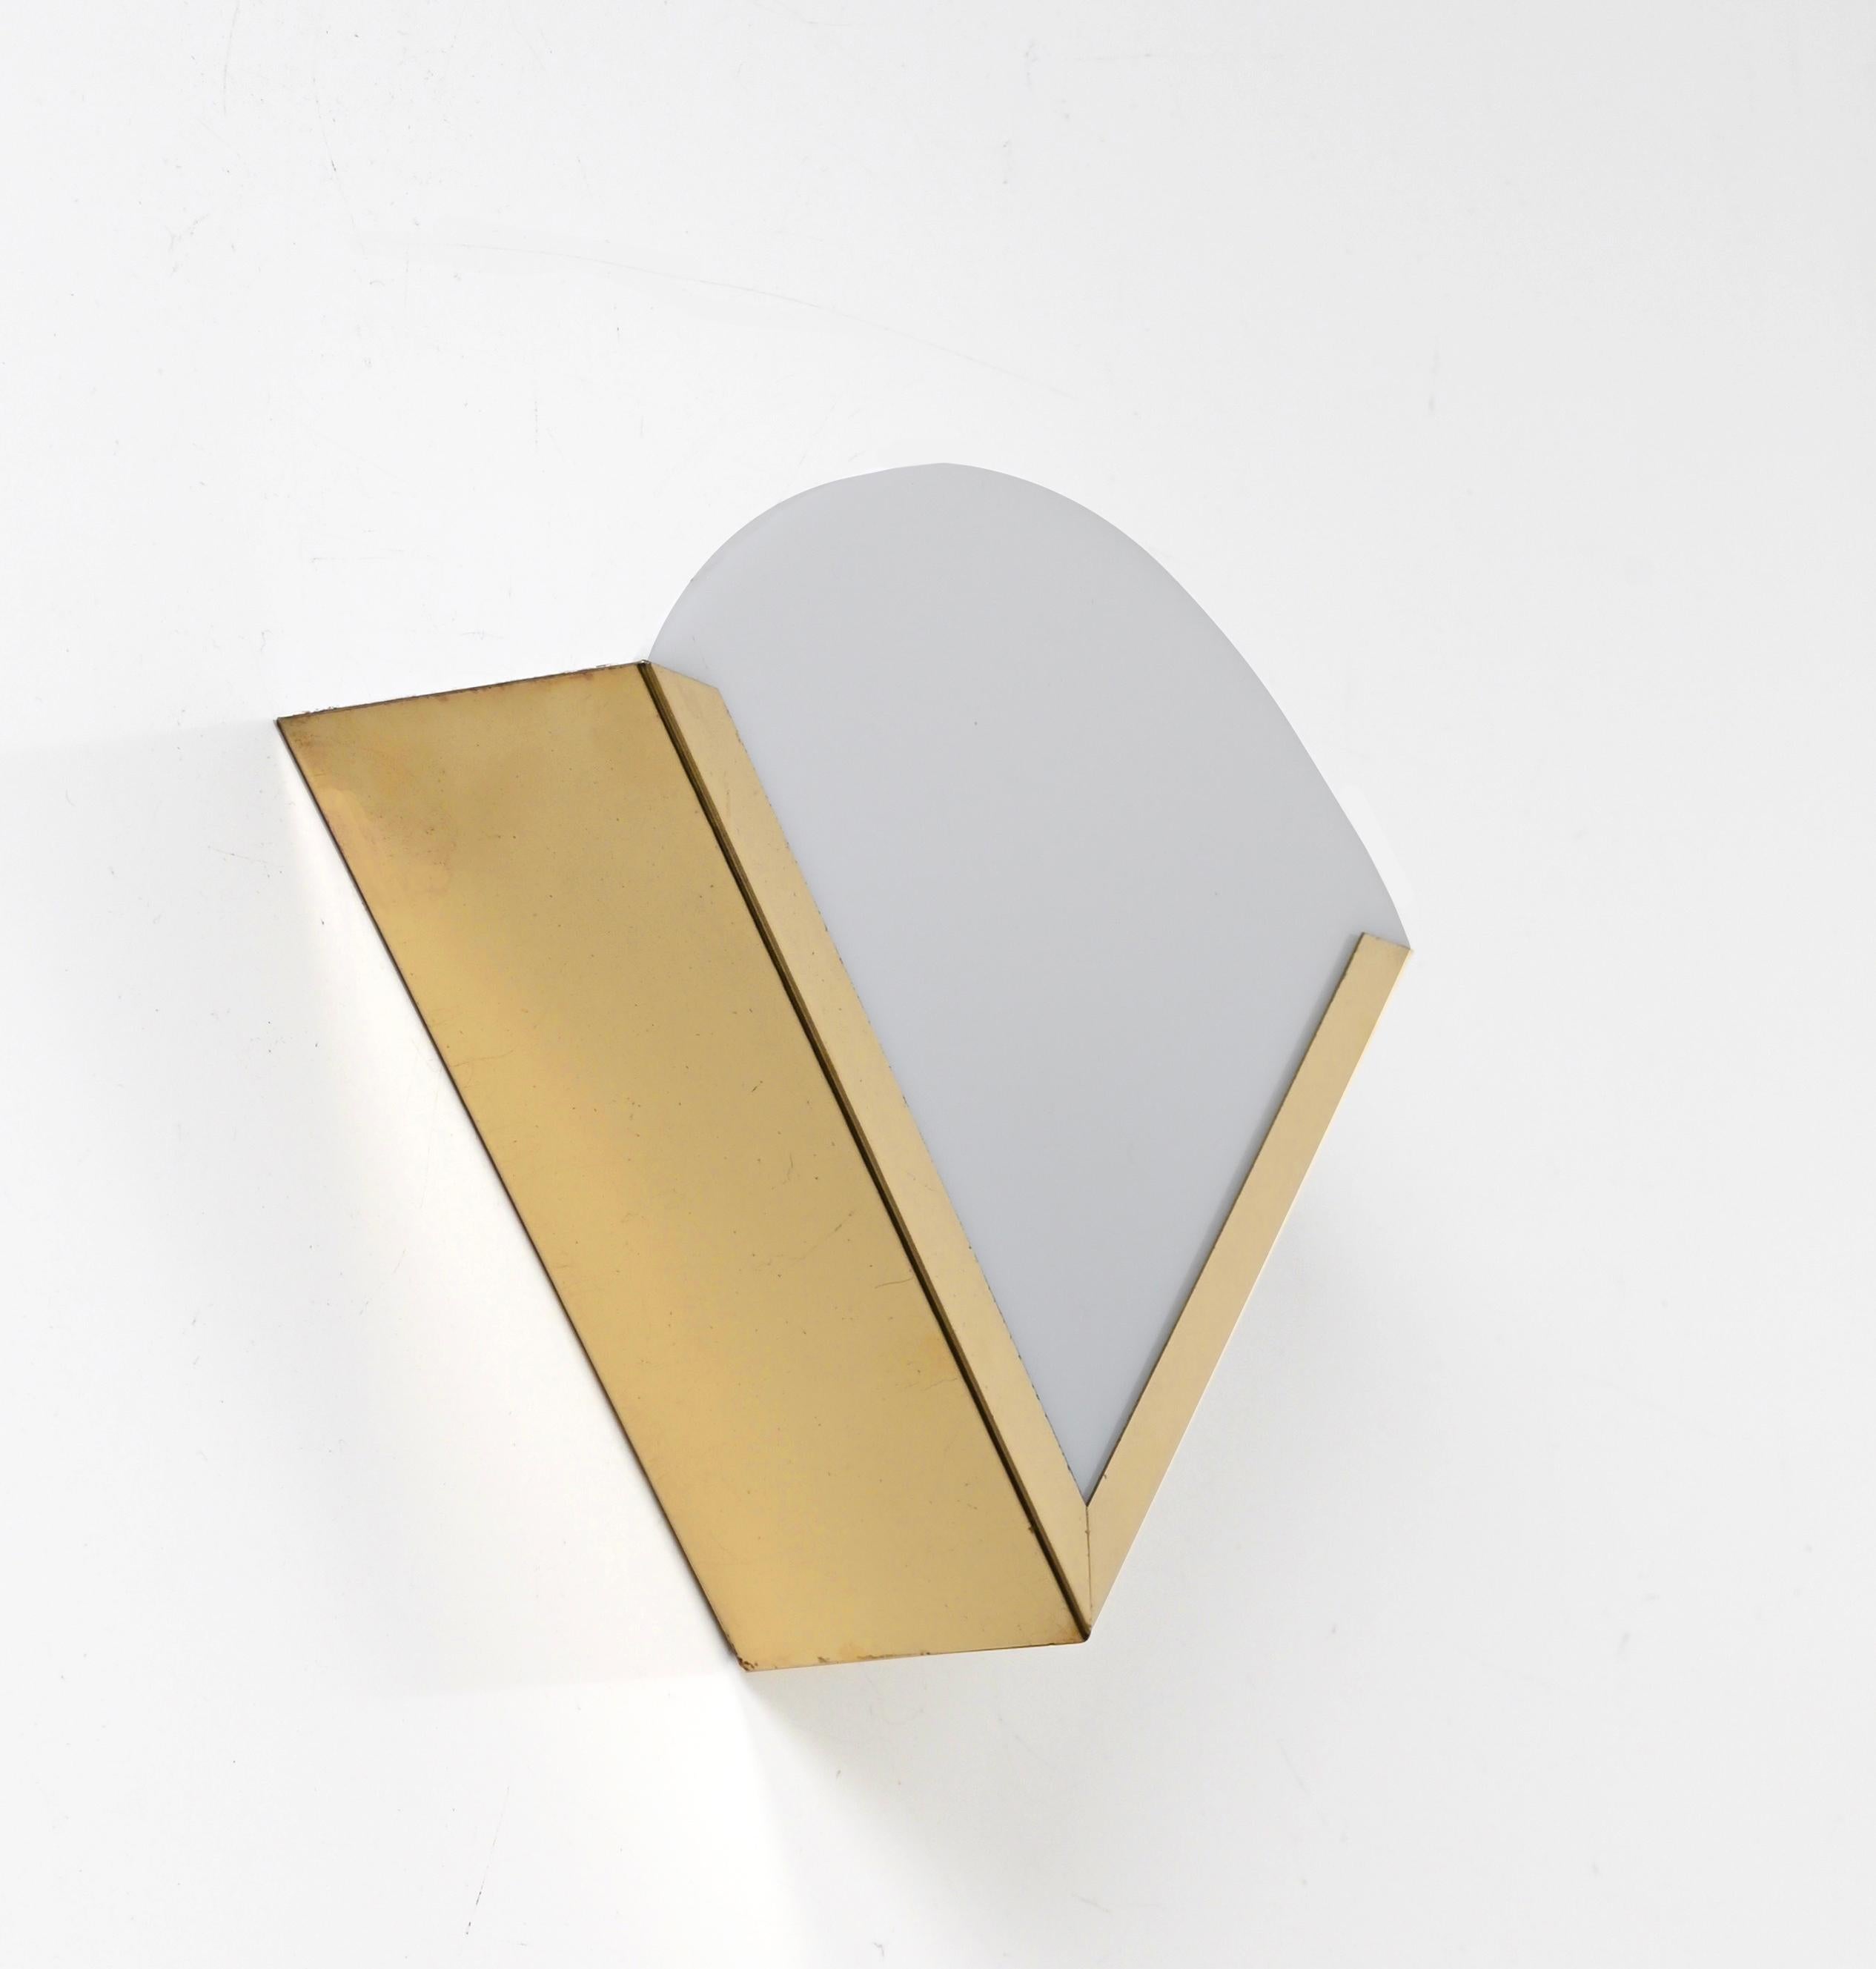 Italian Triangular Sconces in Brass and White Perspex, Italy 1970s For Sale 9